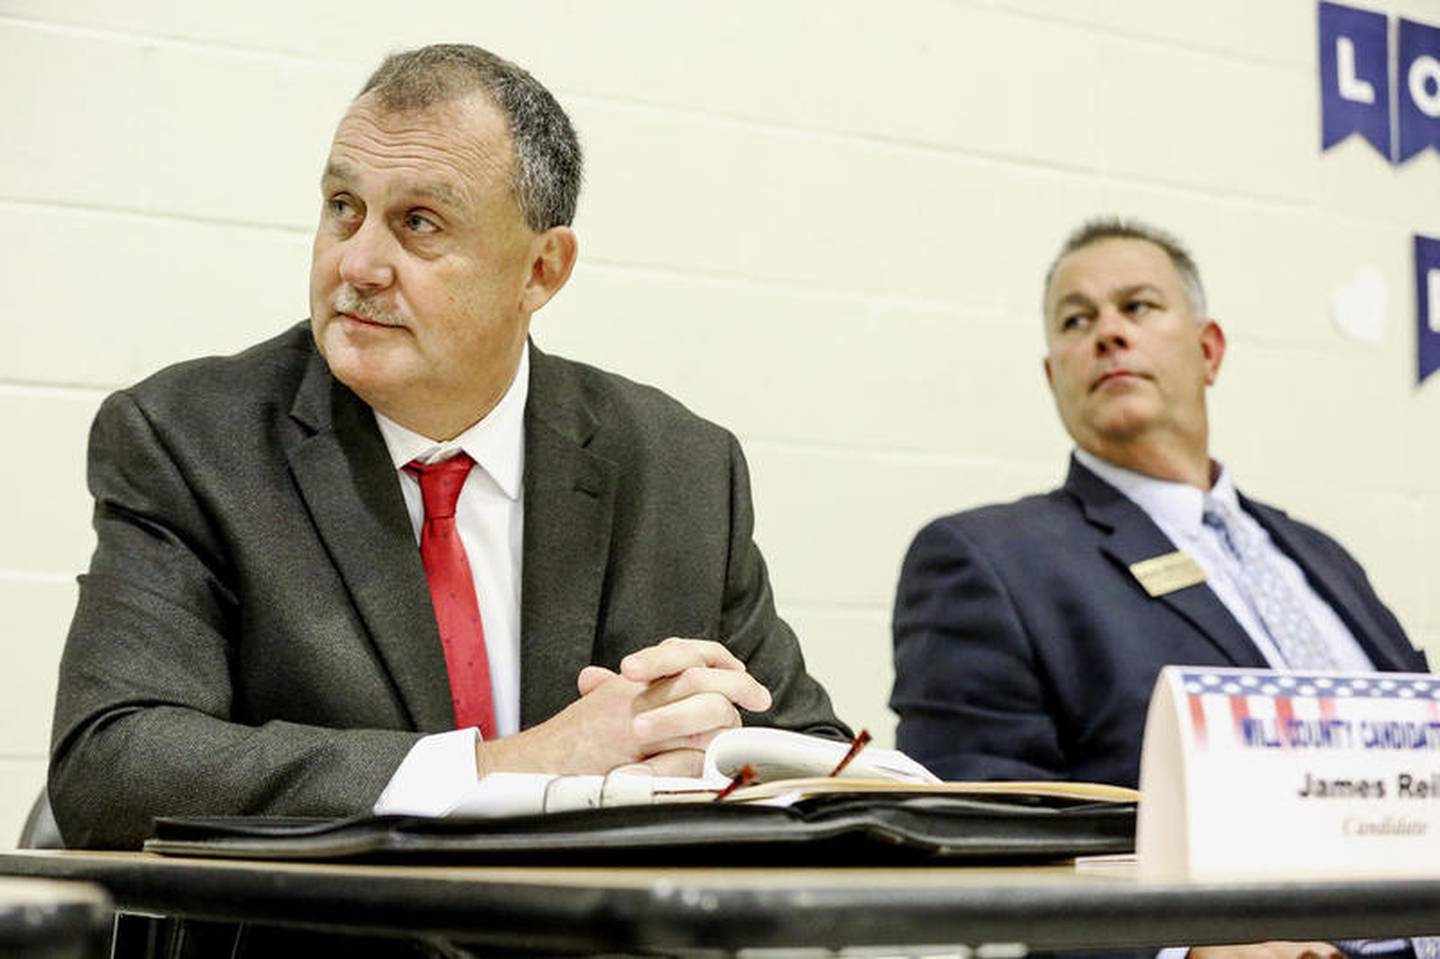 Republican Sheriff Candidate Jim Reilly (left) and Will Coutny Sheriff Mike Kelly share a table Thursday, Sept. 27, 2018, during candidate forum at Mt. Olive Missionary Baptist Church in Joliet, Ill.